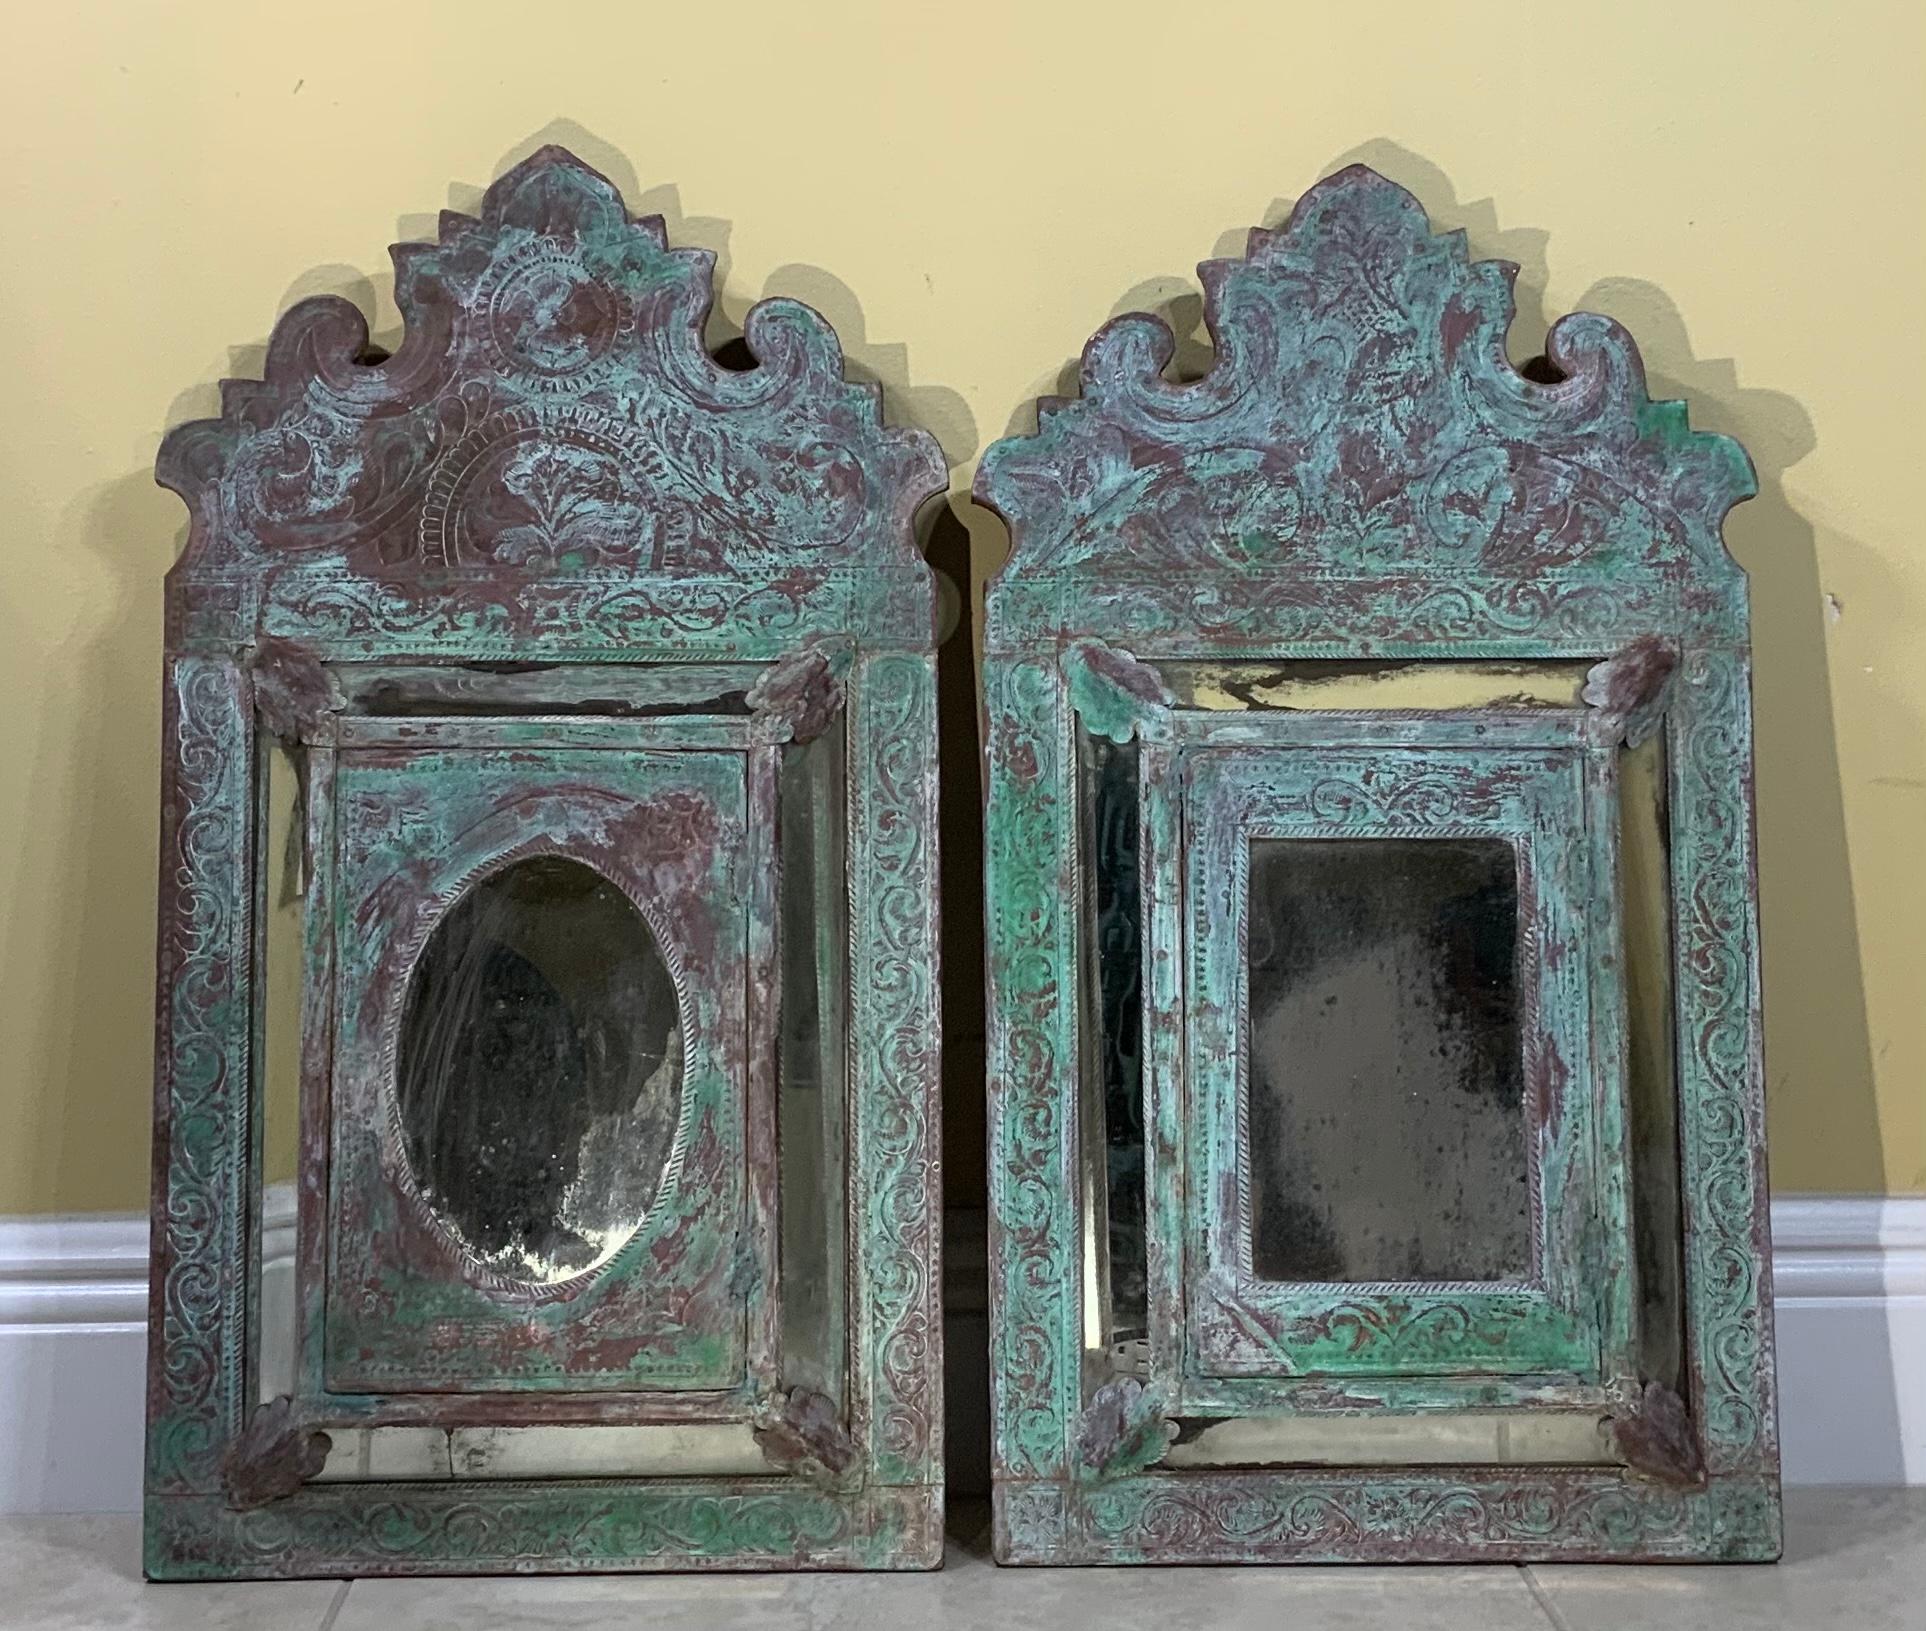 Exceptional pair of mirror made of wood and overlay with decorative copper, originally each mirror had indoor compartment, but it was seal and can be use as decorative mirror. Most mirror are blurry and foggy and few minor cracks, see photos, the